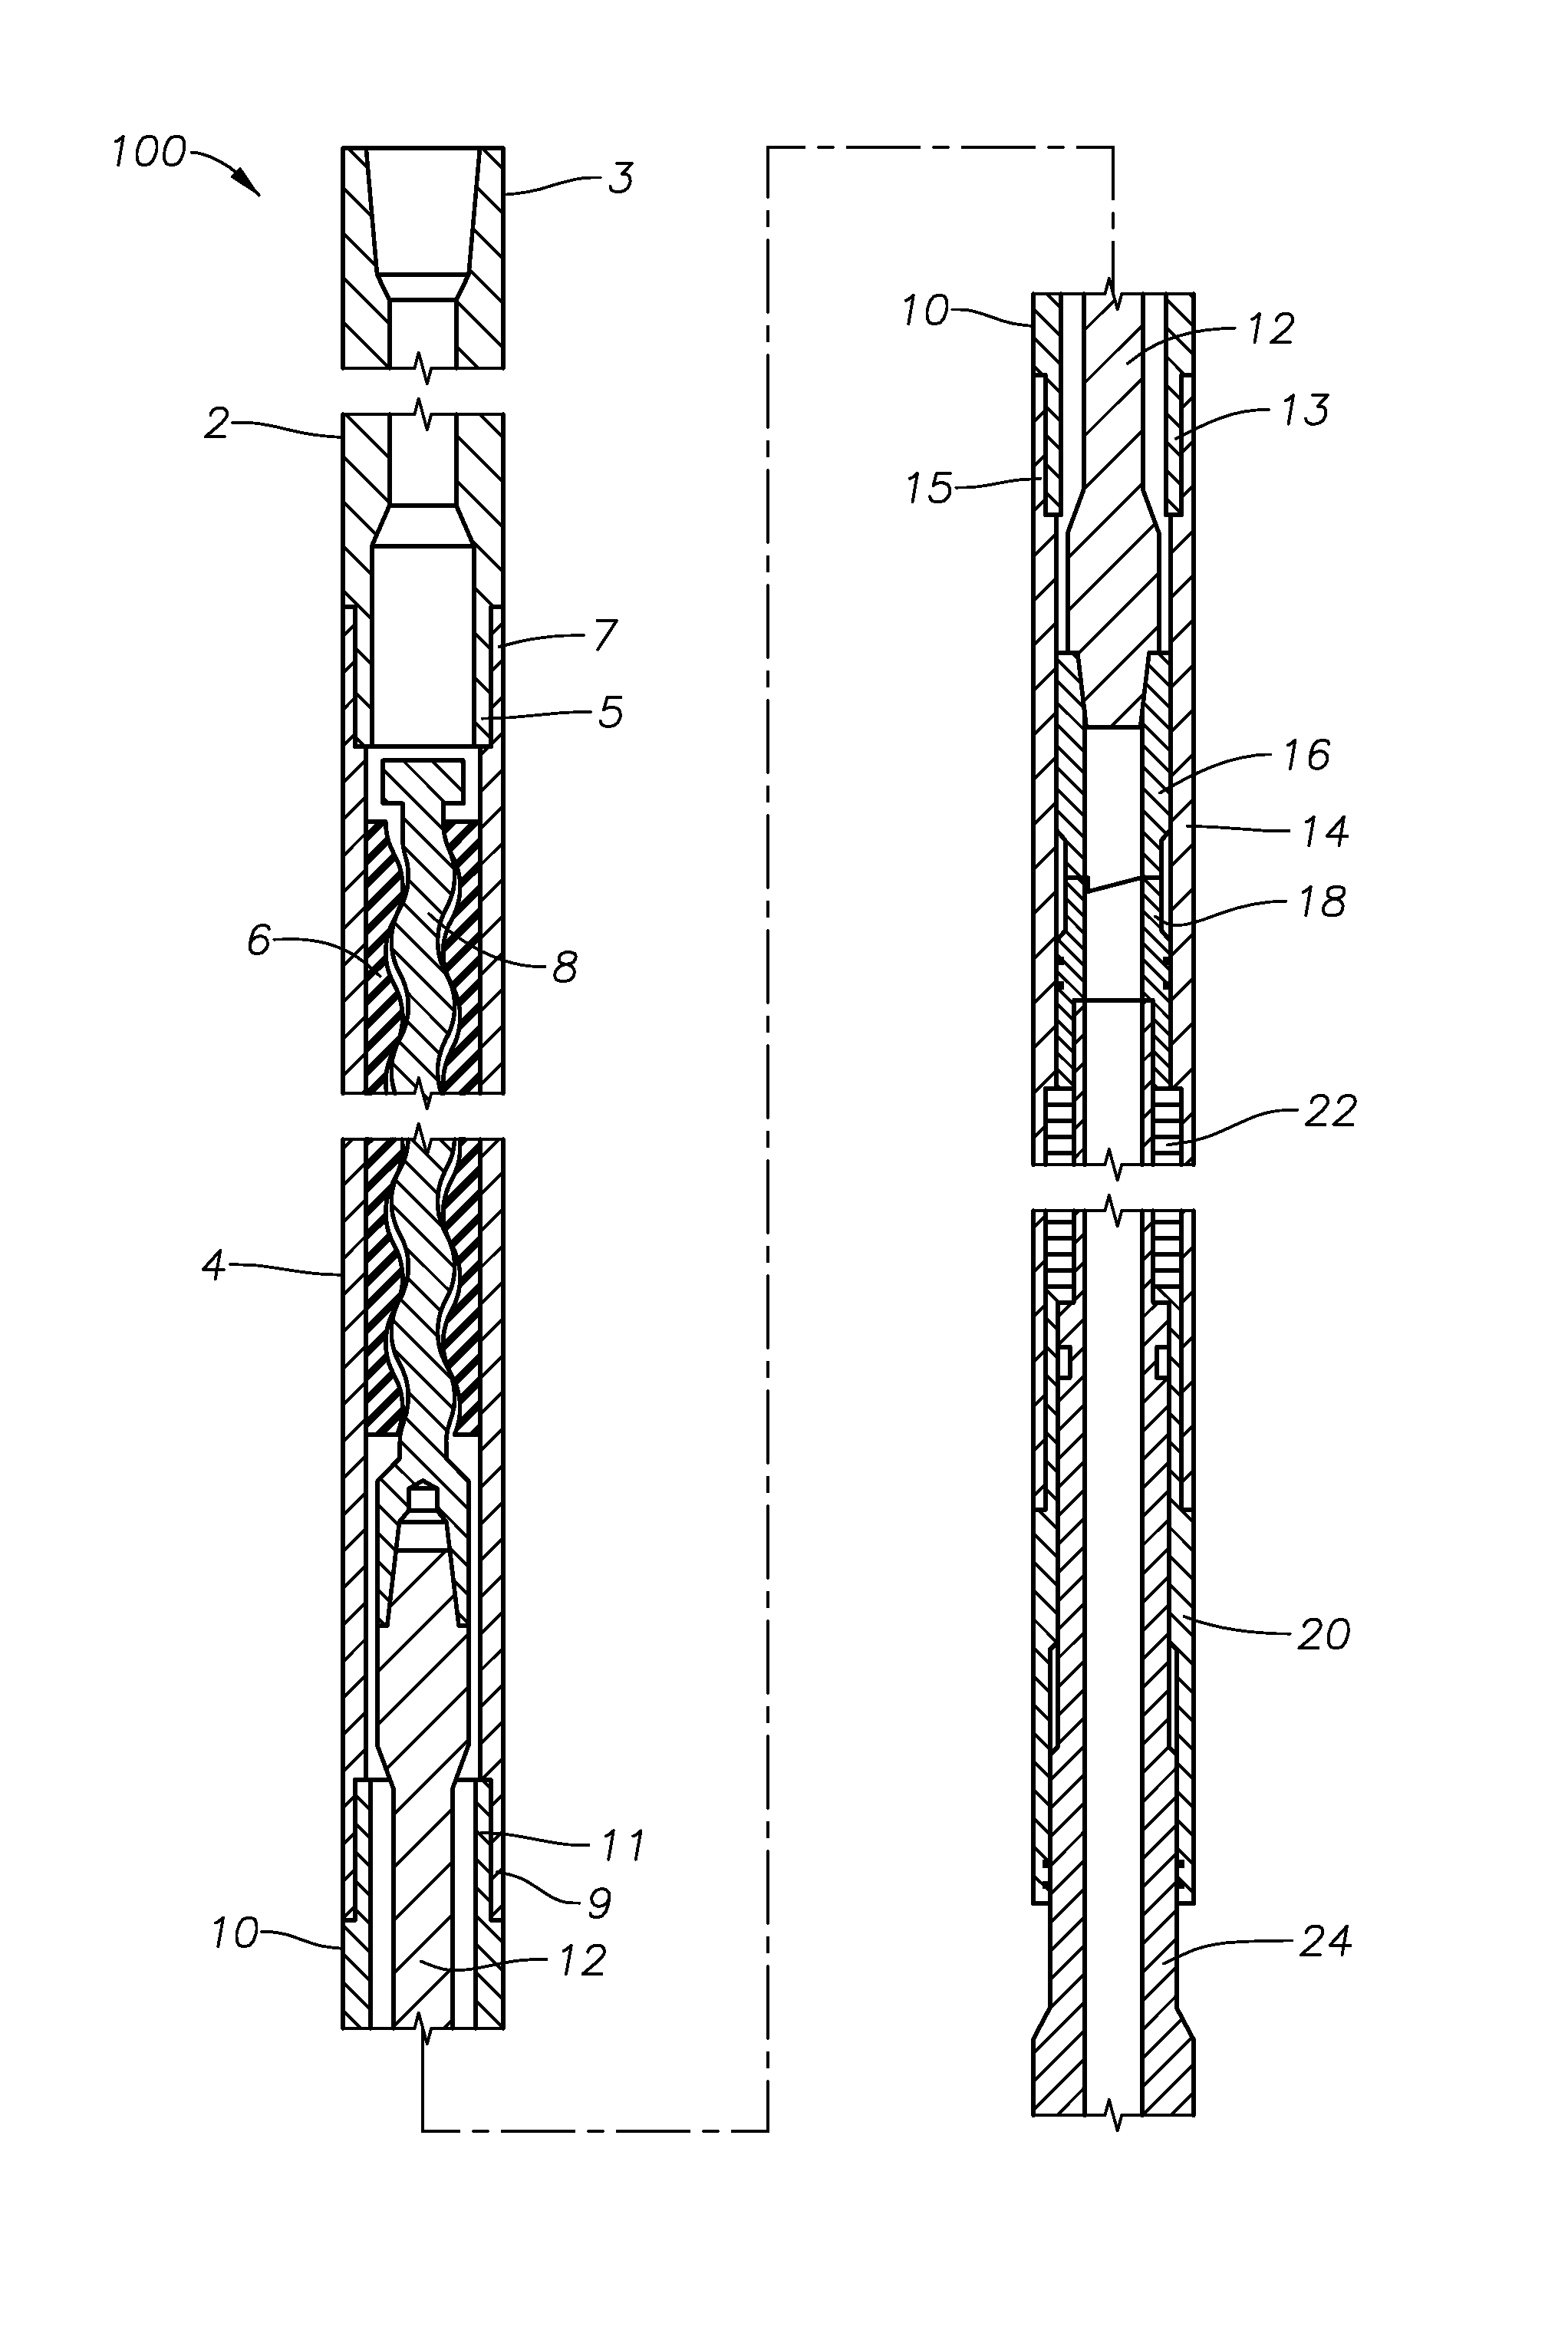 Systems and methods for producing forced axial vibration of a drillstring